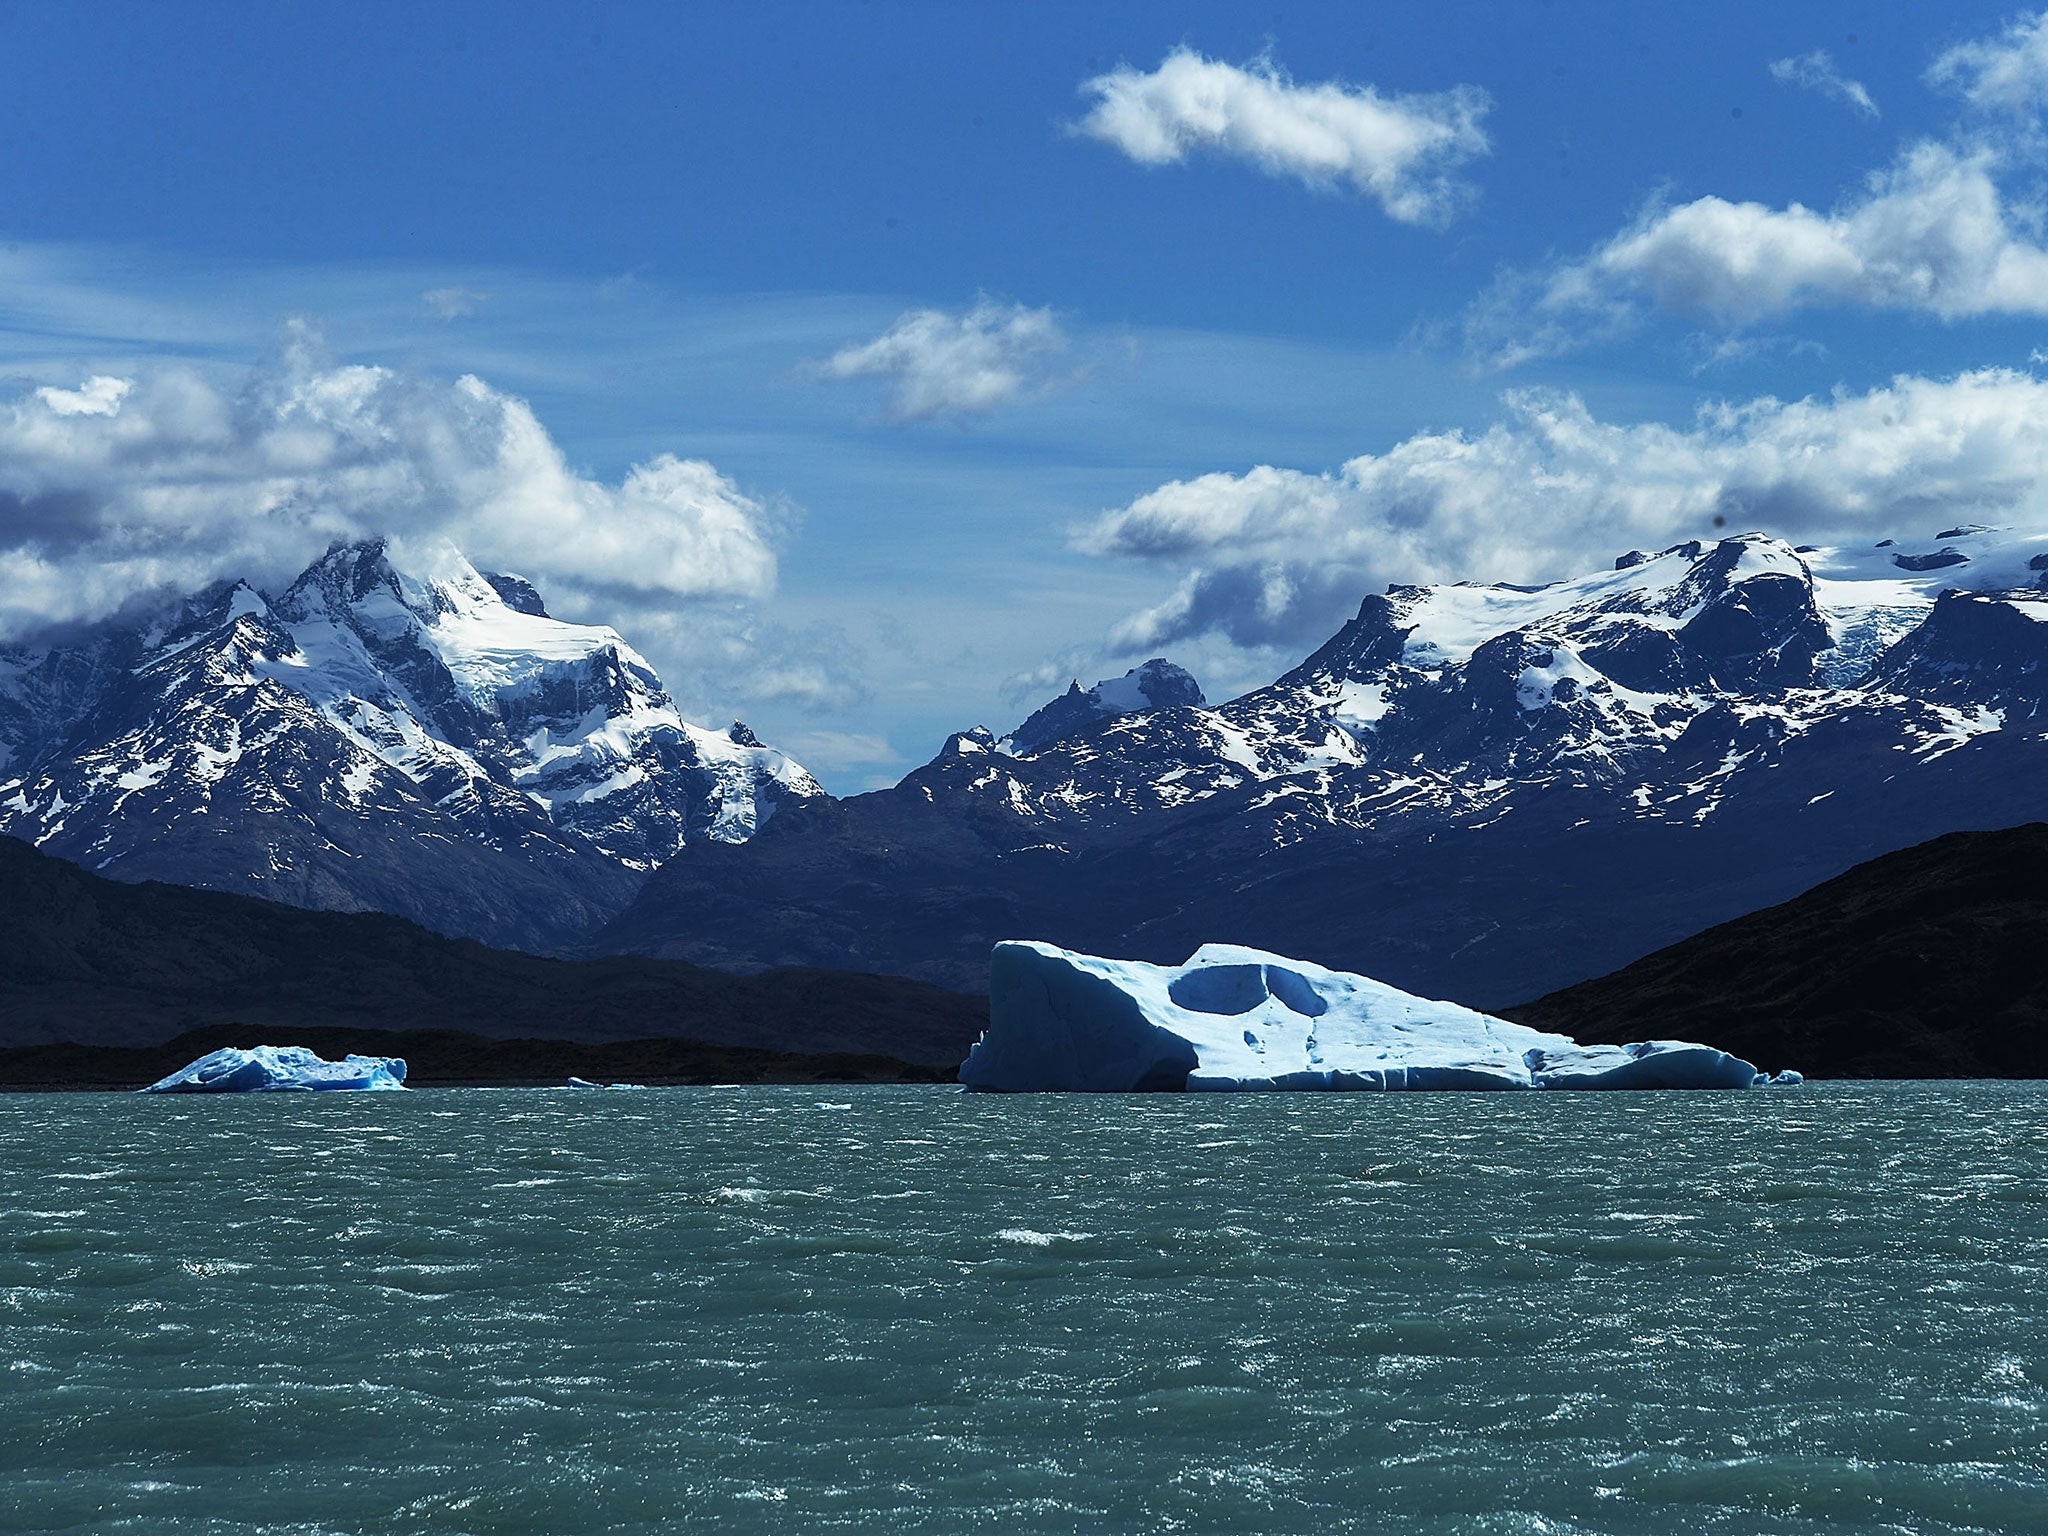 Ice floats in Lake Argentino, southern Patagonia. The majority of the large glaciers in the surrounding Los Glaciares National Park have been retreating over the past fifty years due to warming temperatures